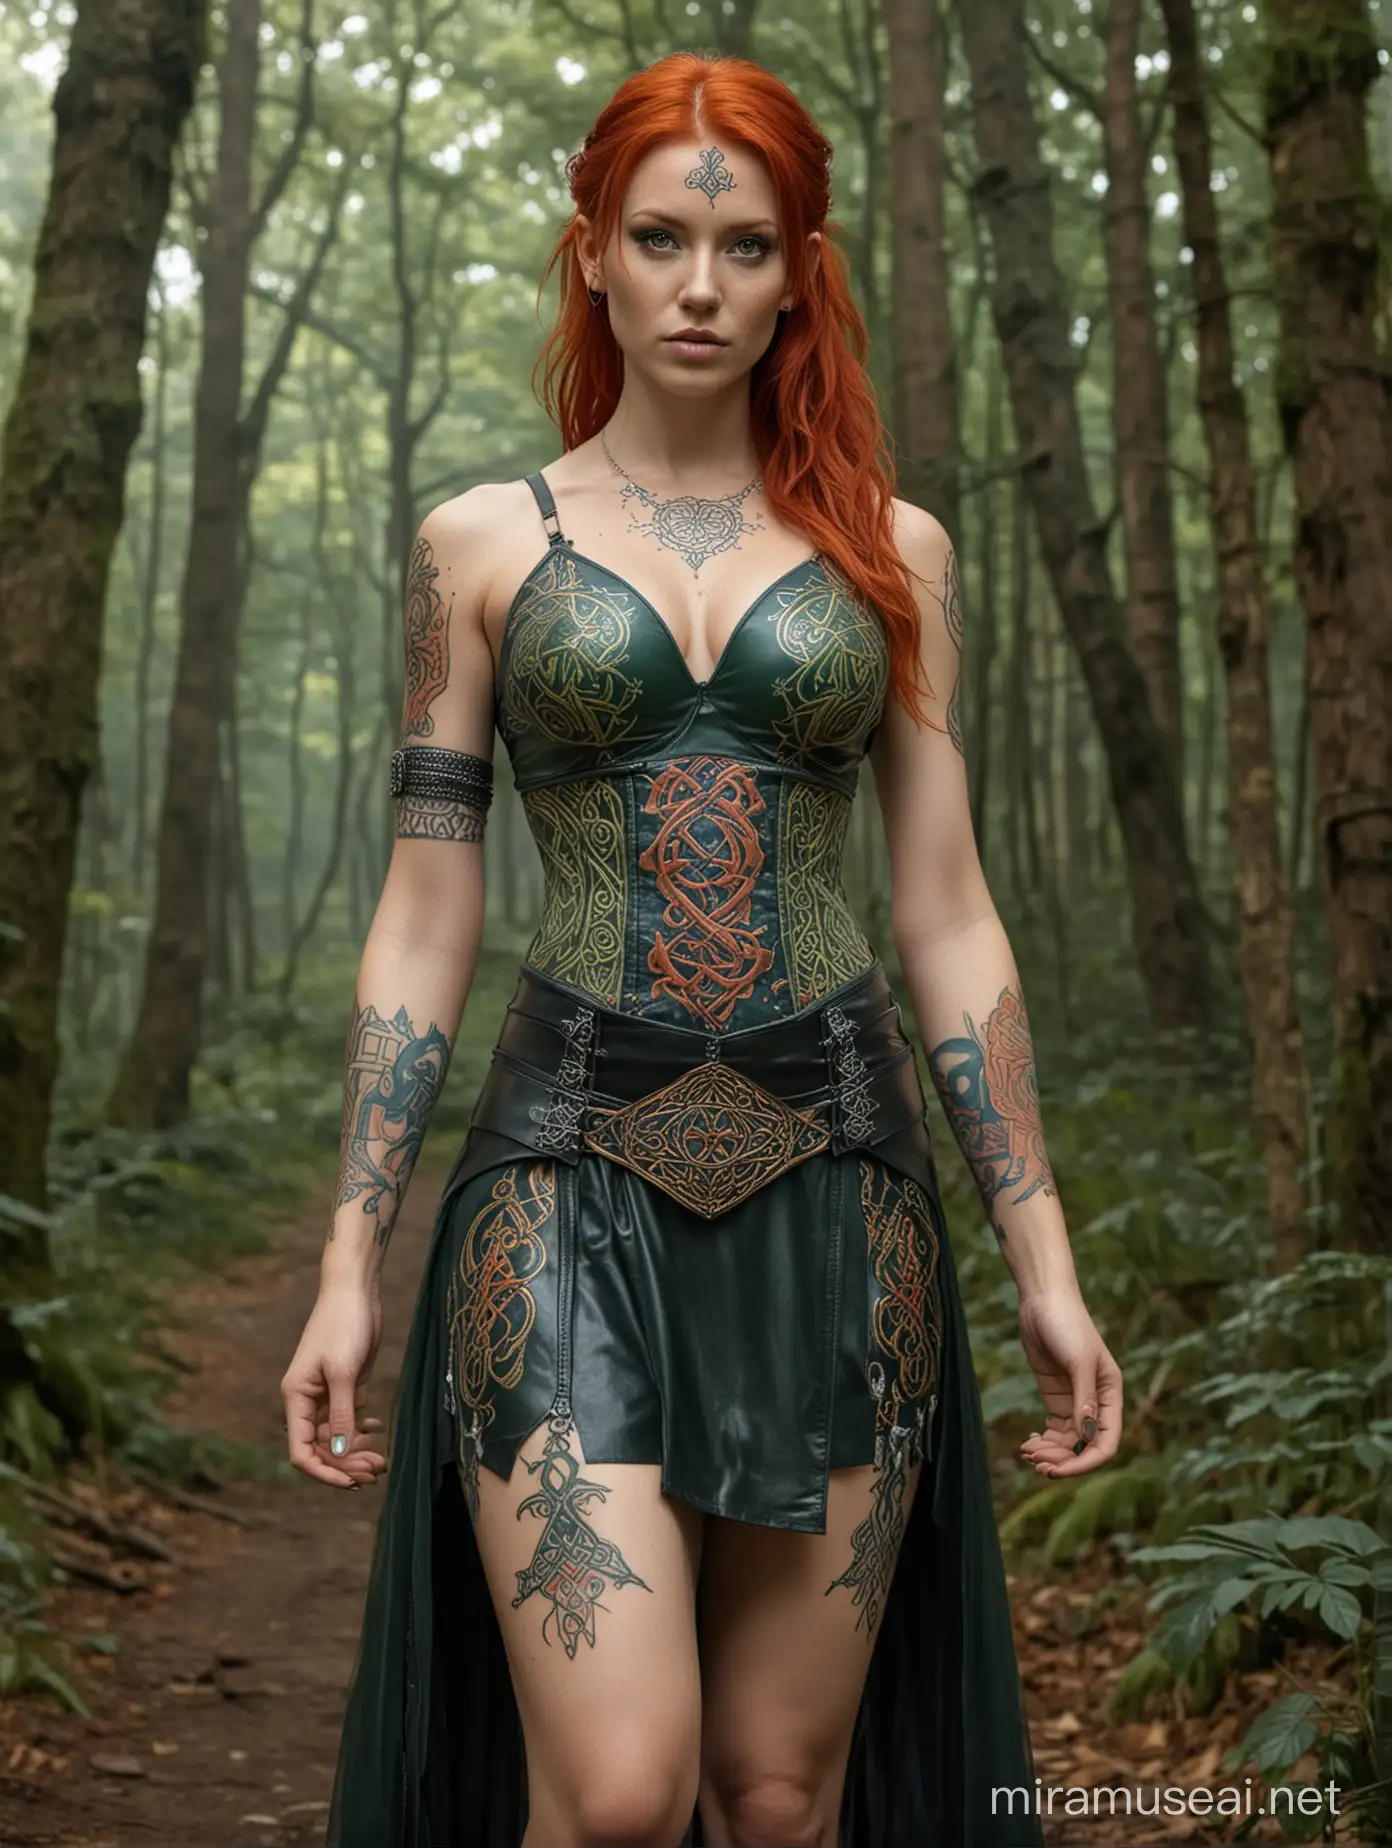 Fiery RedHaired Female in ElvenInspired Attire Amidst Forest Serenity